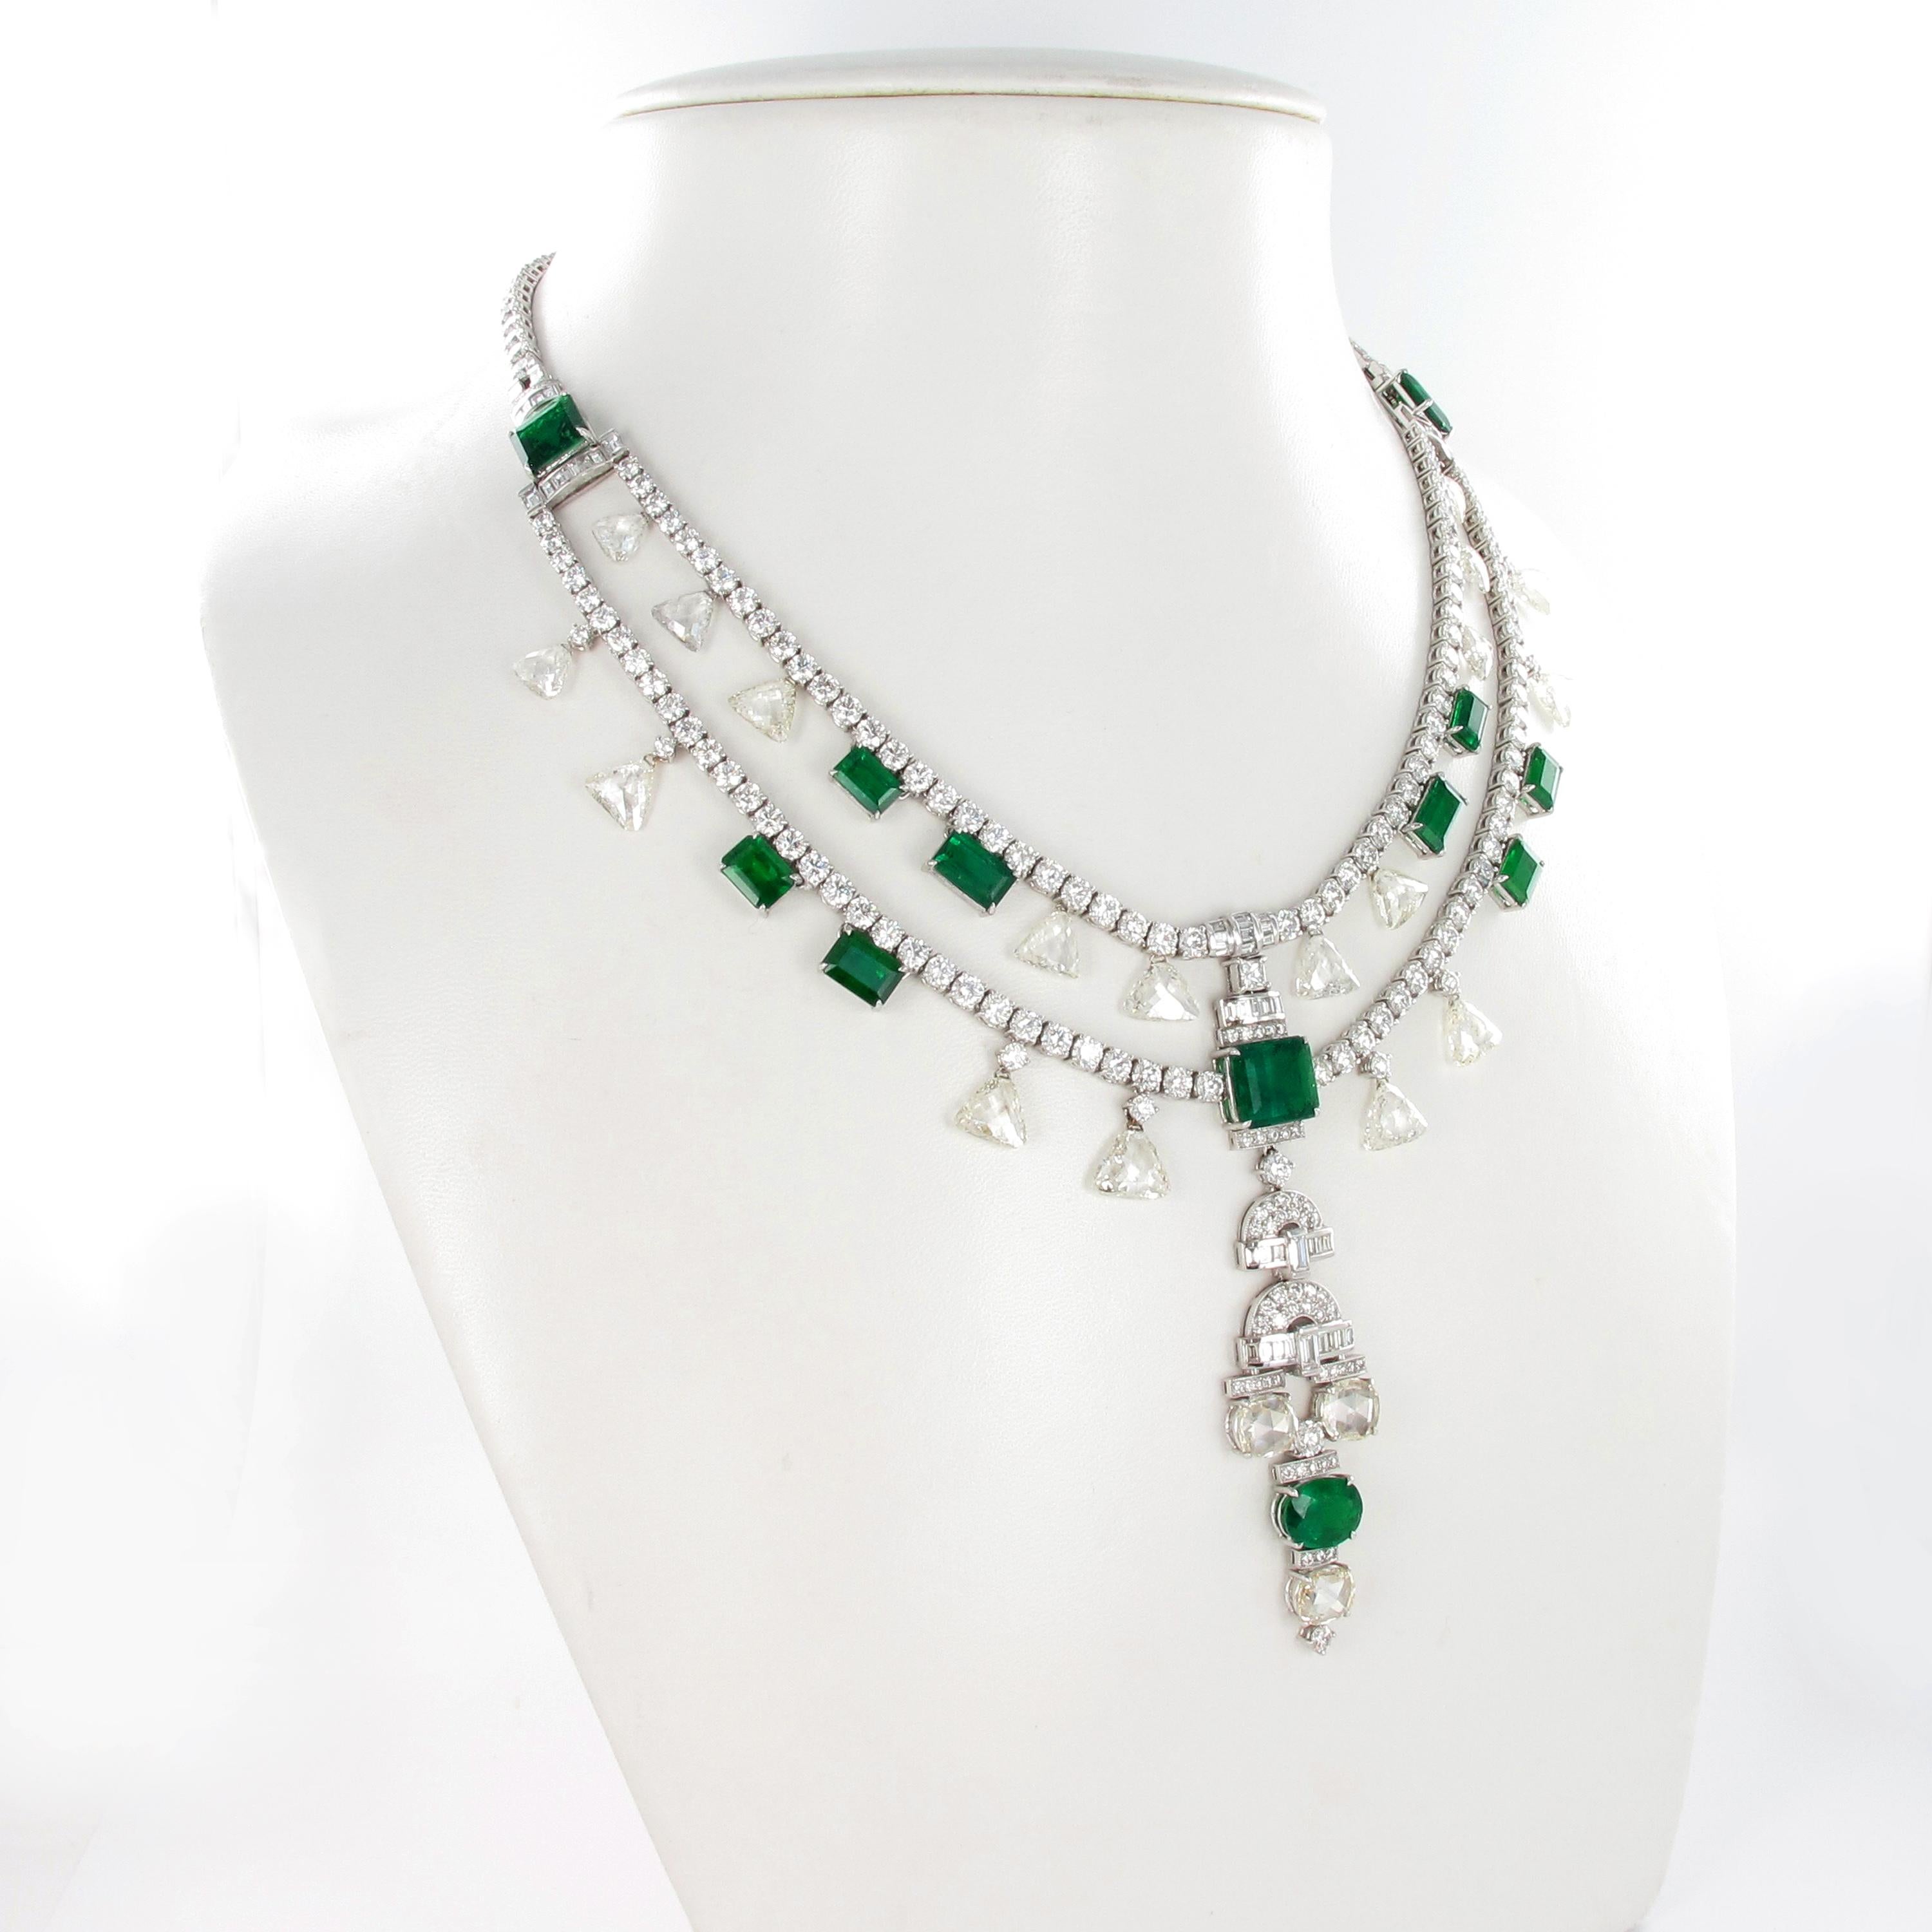 Set with thirteen oval and step-cut emeralds stated to weigh approximately 24.88 carats in total, embellished with 21 briolette-cut diamonds totalling approximate 29 carats. Finished with 336 diamond (brilliant- and baguette-cut) totalling